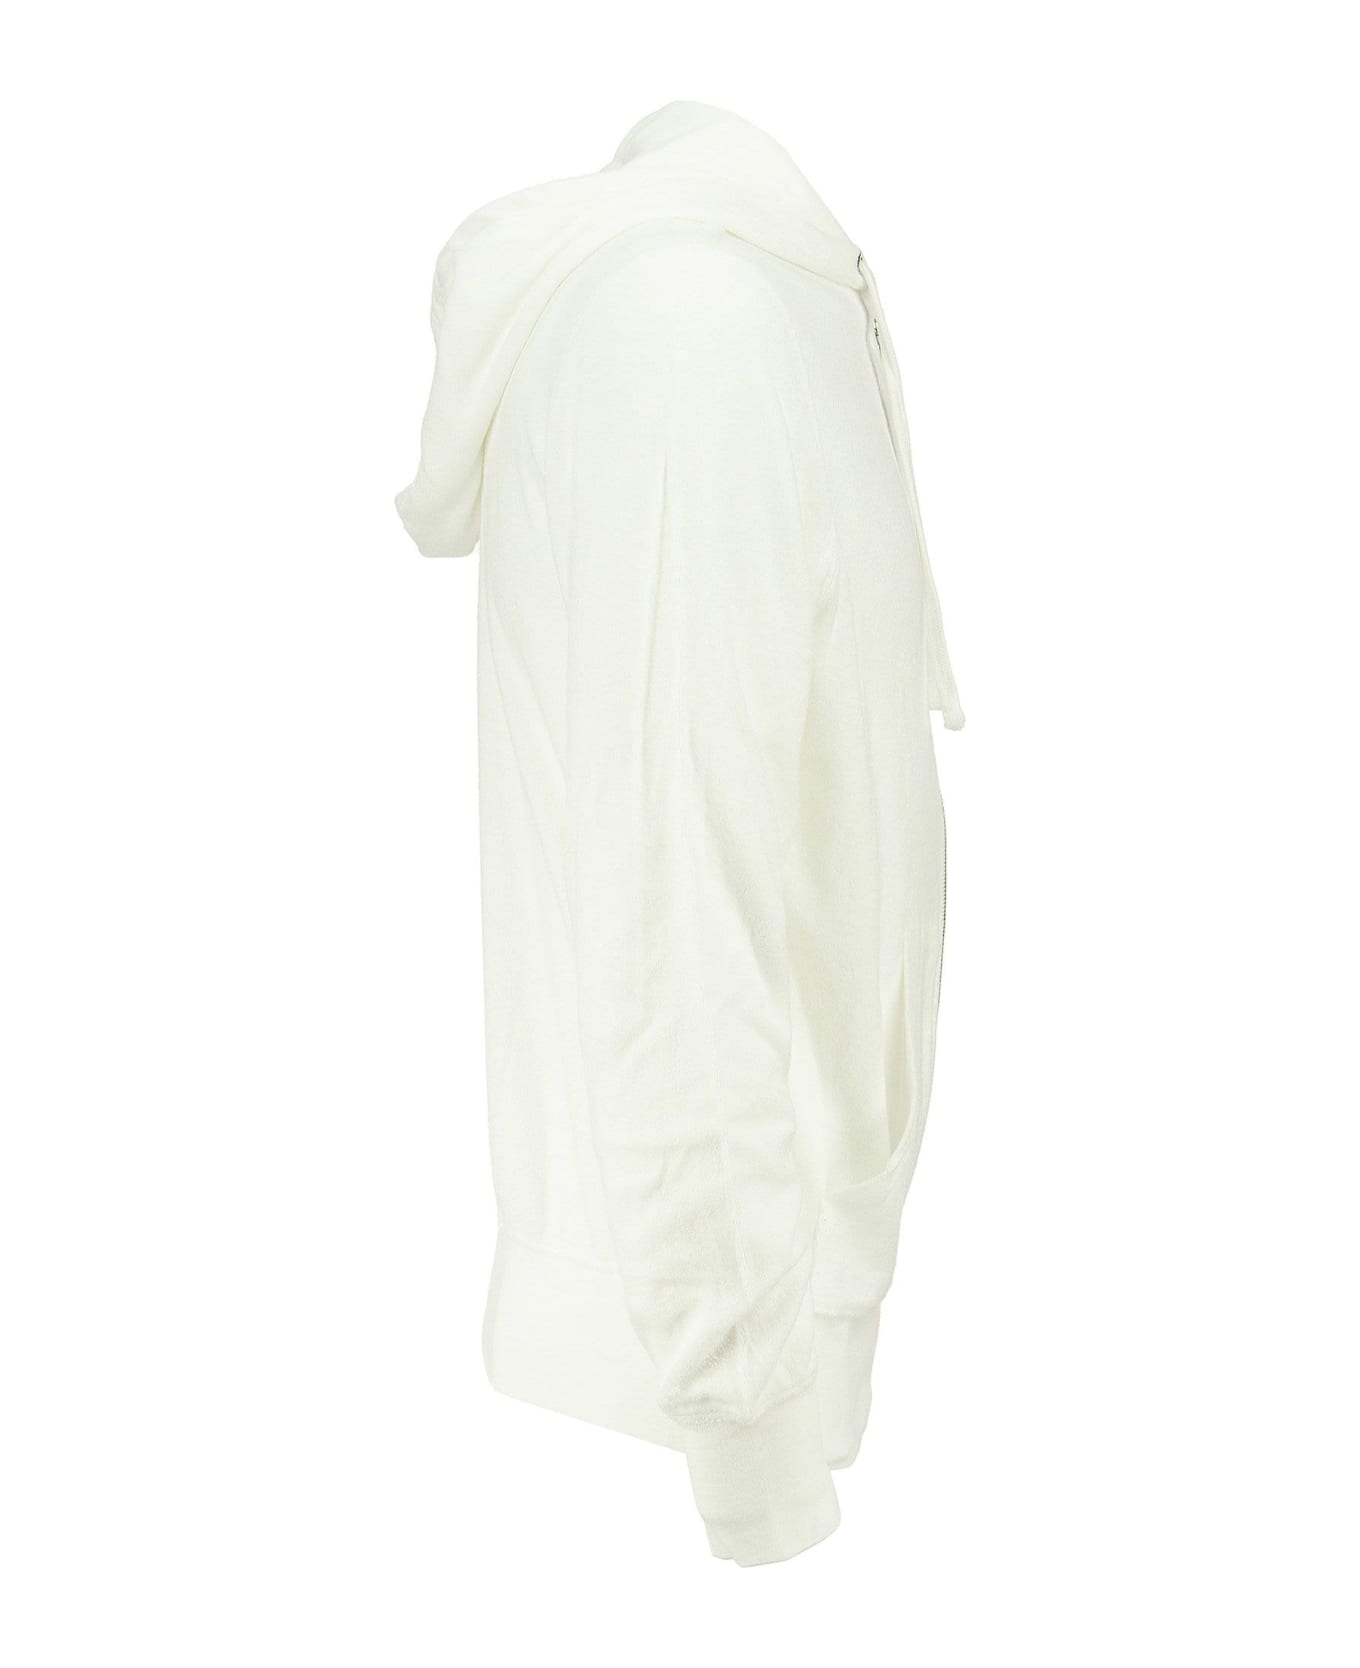 Majestic Filatures Hooded Sweatshirt In Cotton And Modal - White